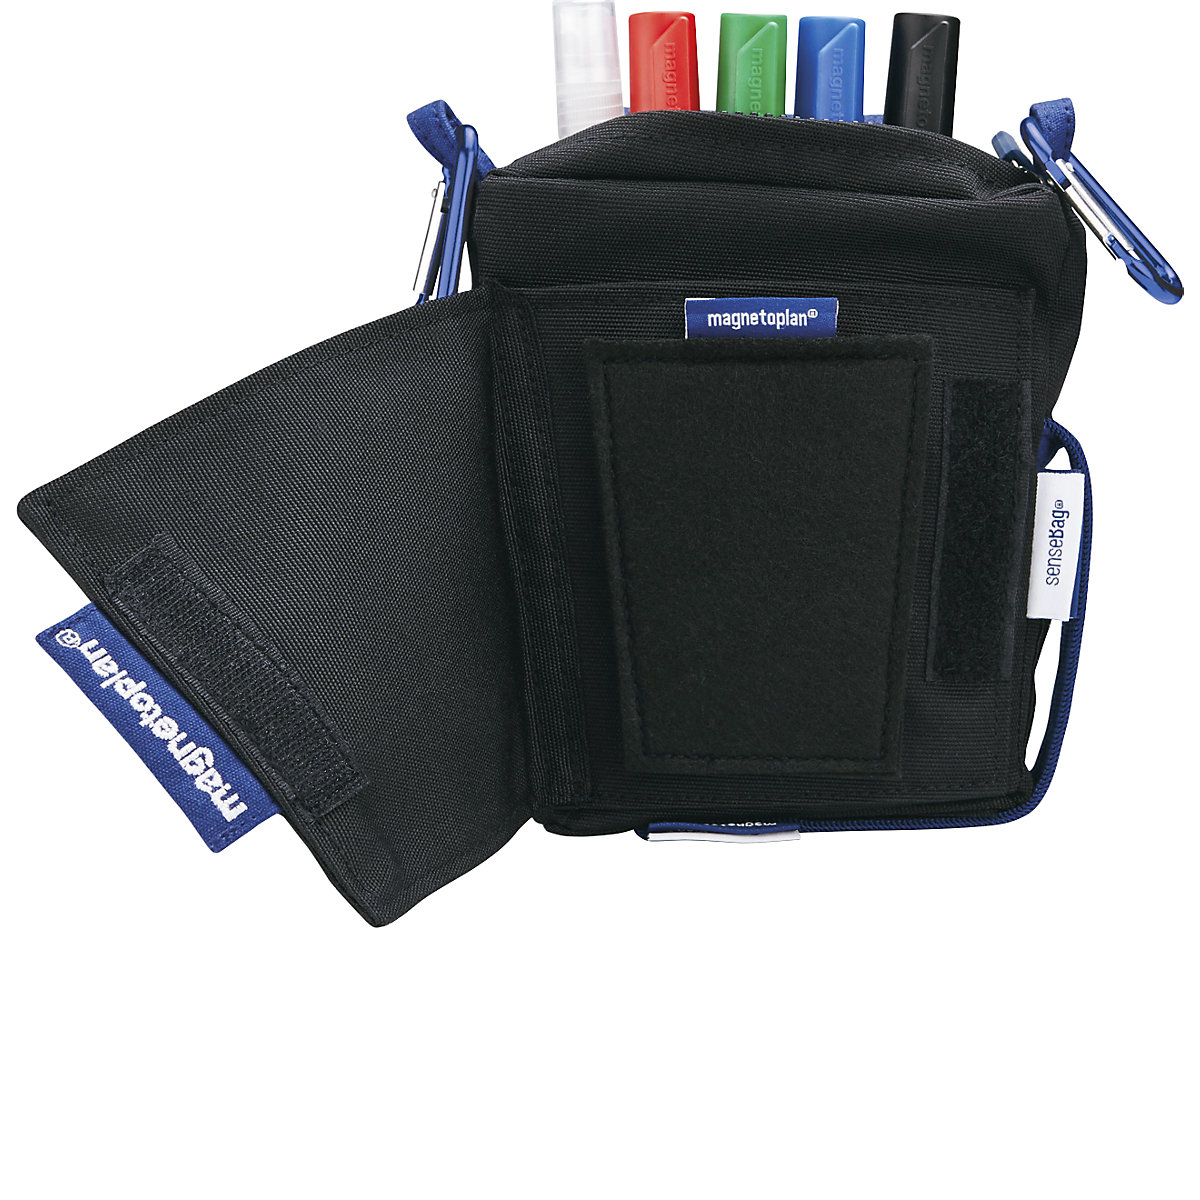 ACTION HOLSTER presentation pouch – magnetoplan